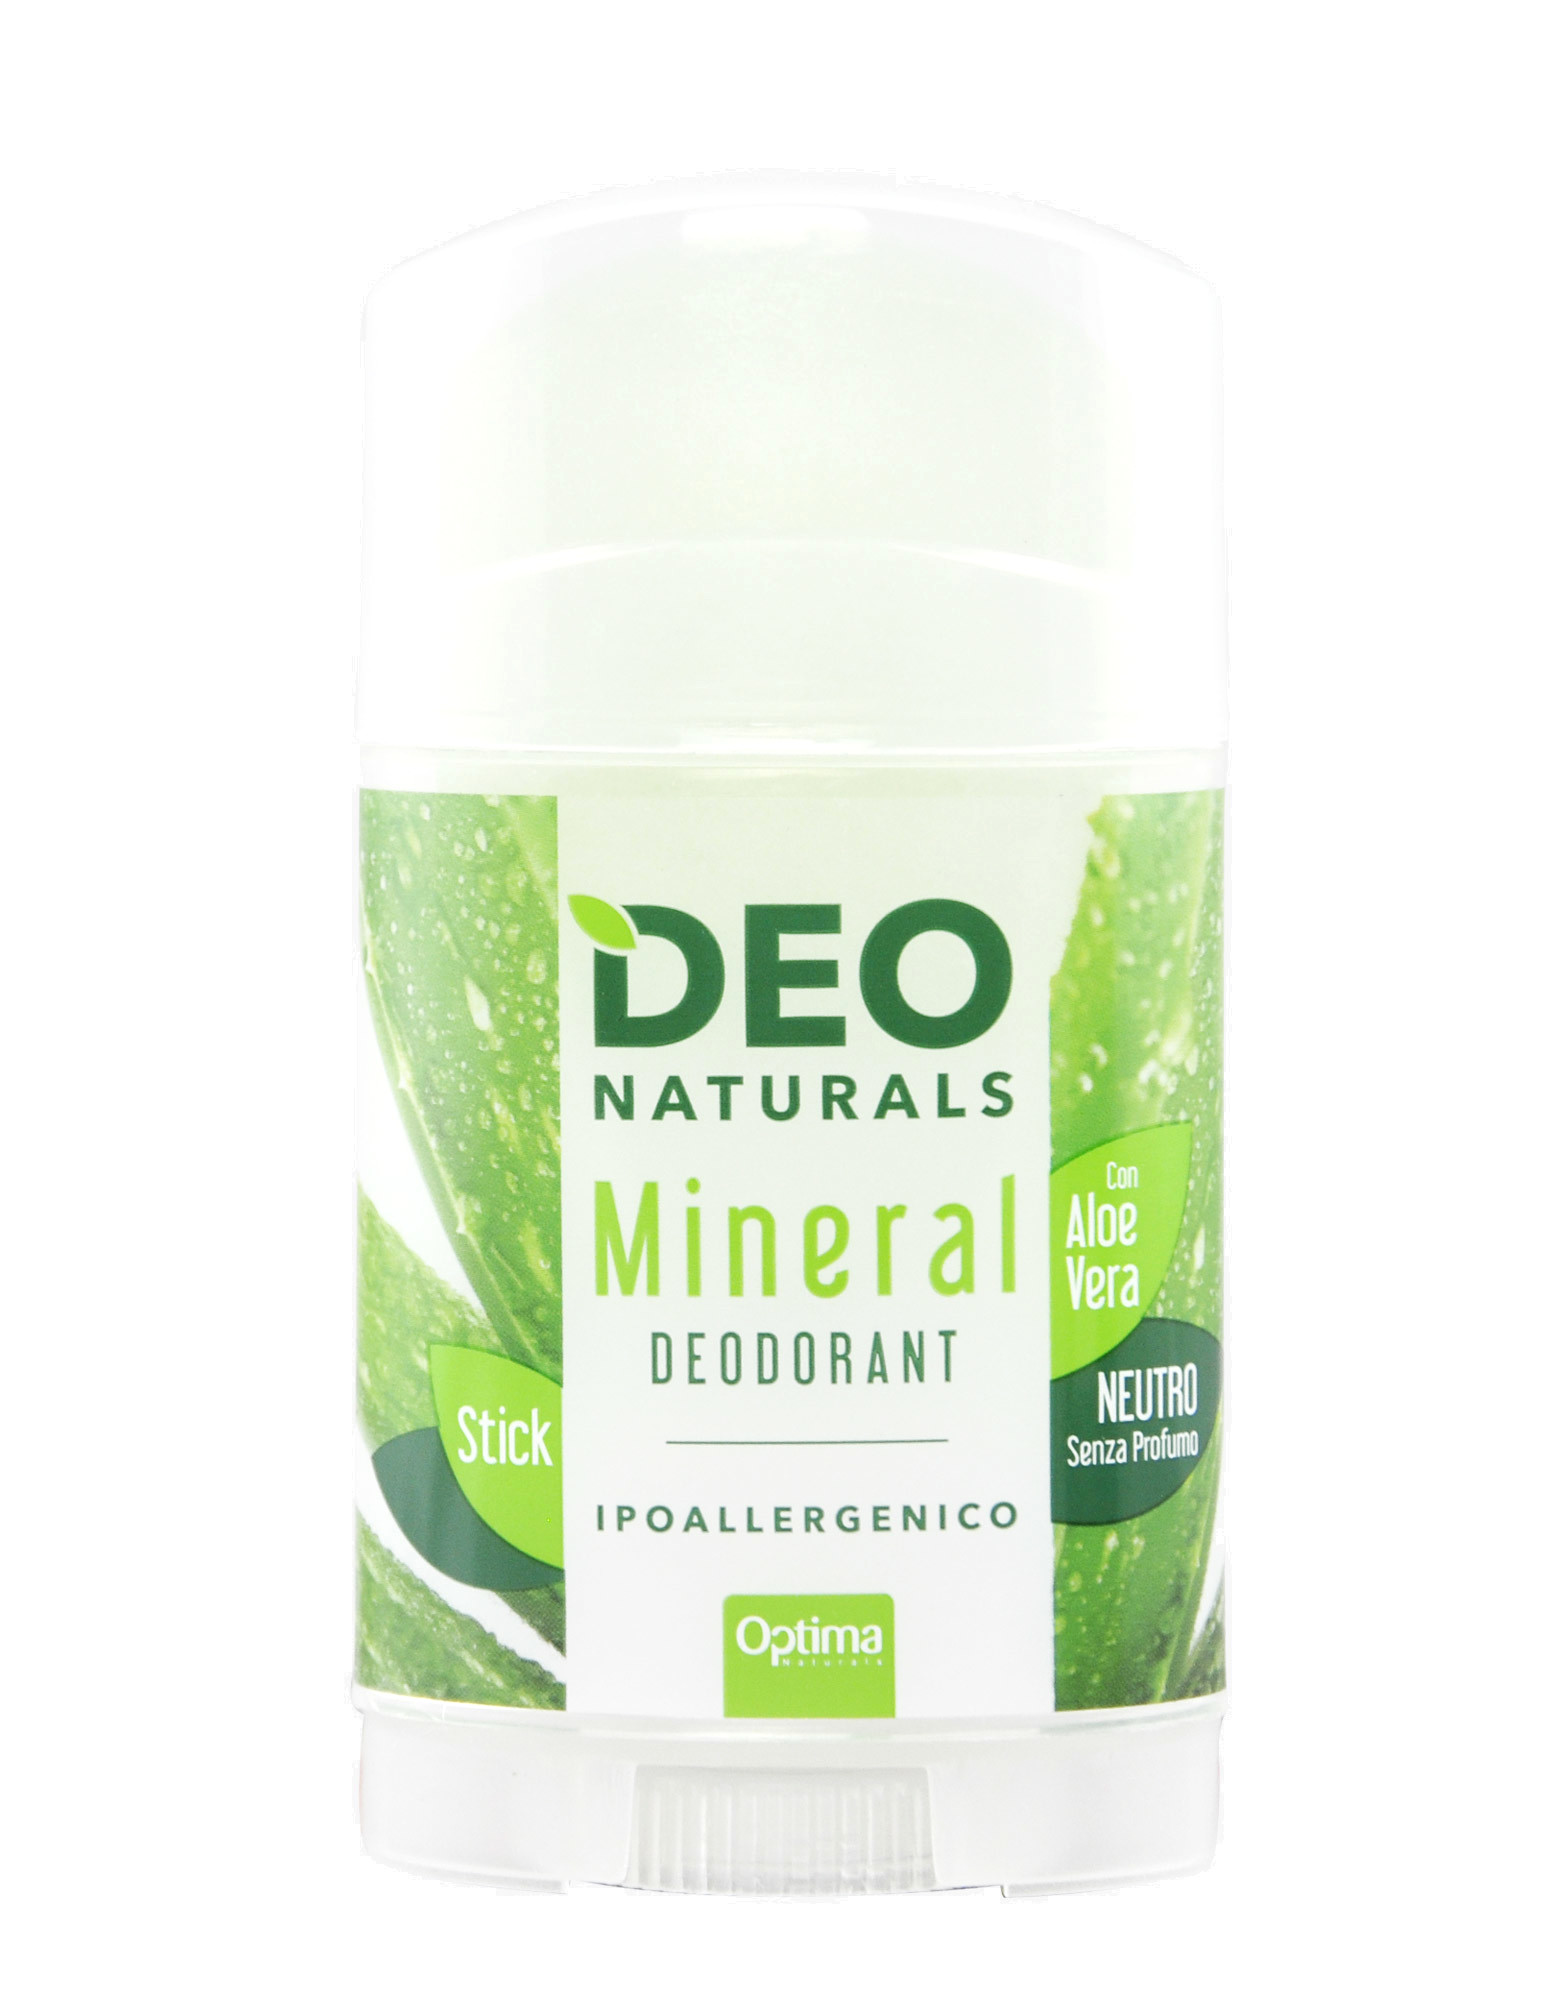 Deo Naturals - Mineral Deodorant Neutral with Aloe Vera by Optima, 100 grams - iafstore.com